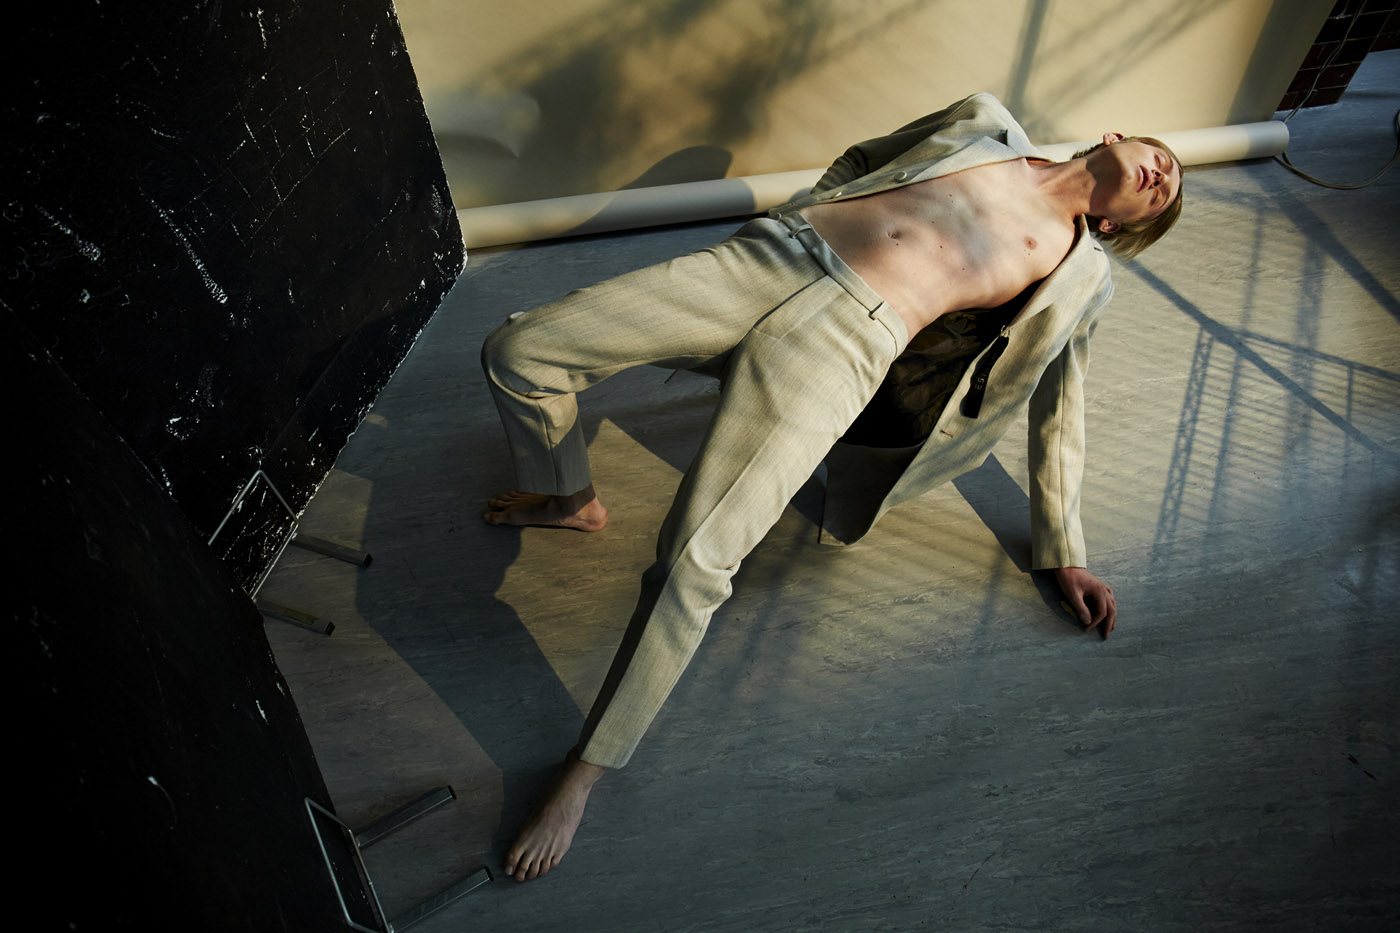 Matthew Miller AW15 by Chairit Prapai for CHASSEUR MAGAZINE ISSUE #11 - YOURS WAS THE BODY